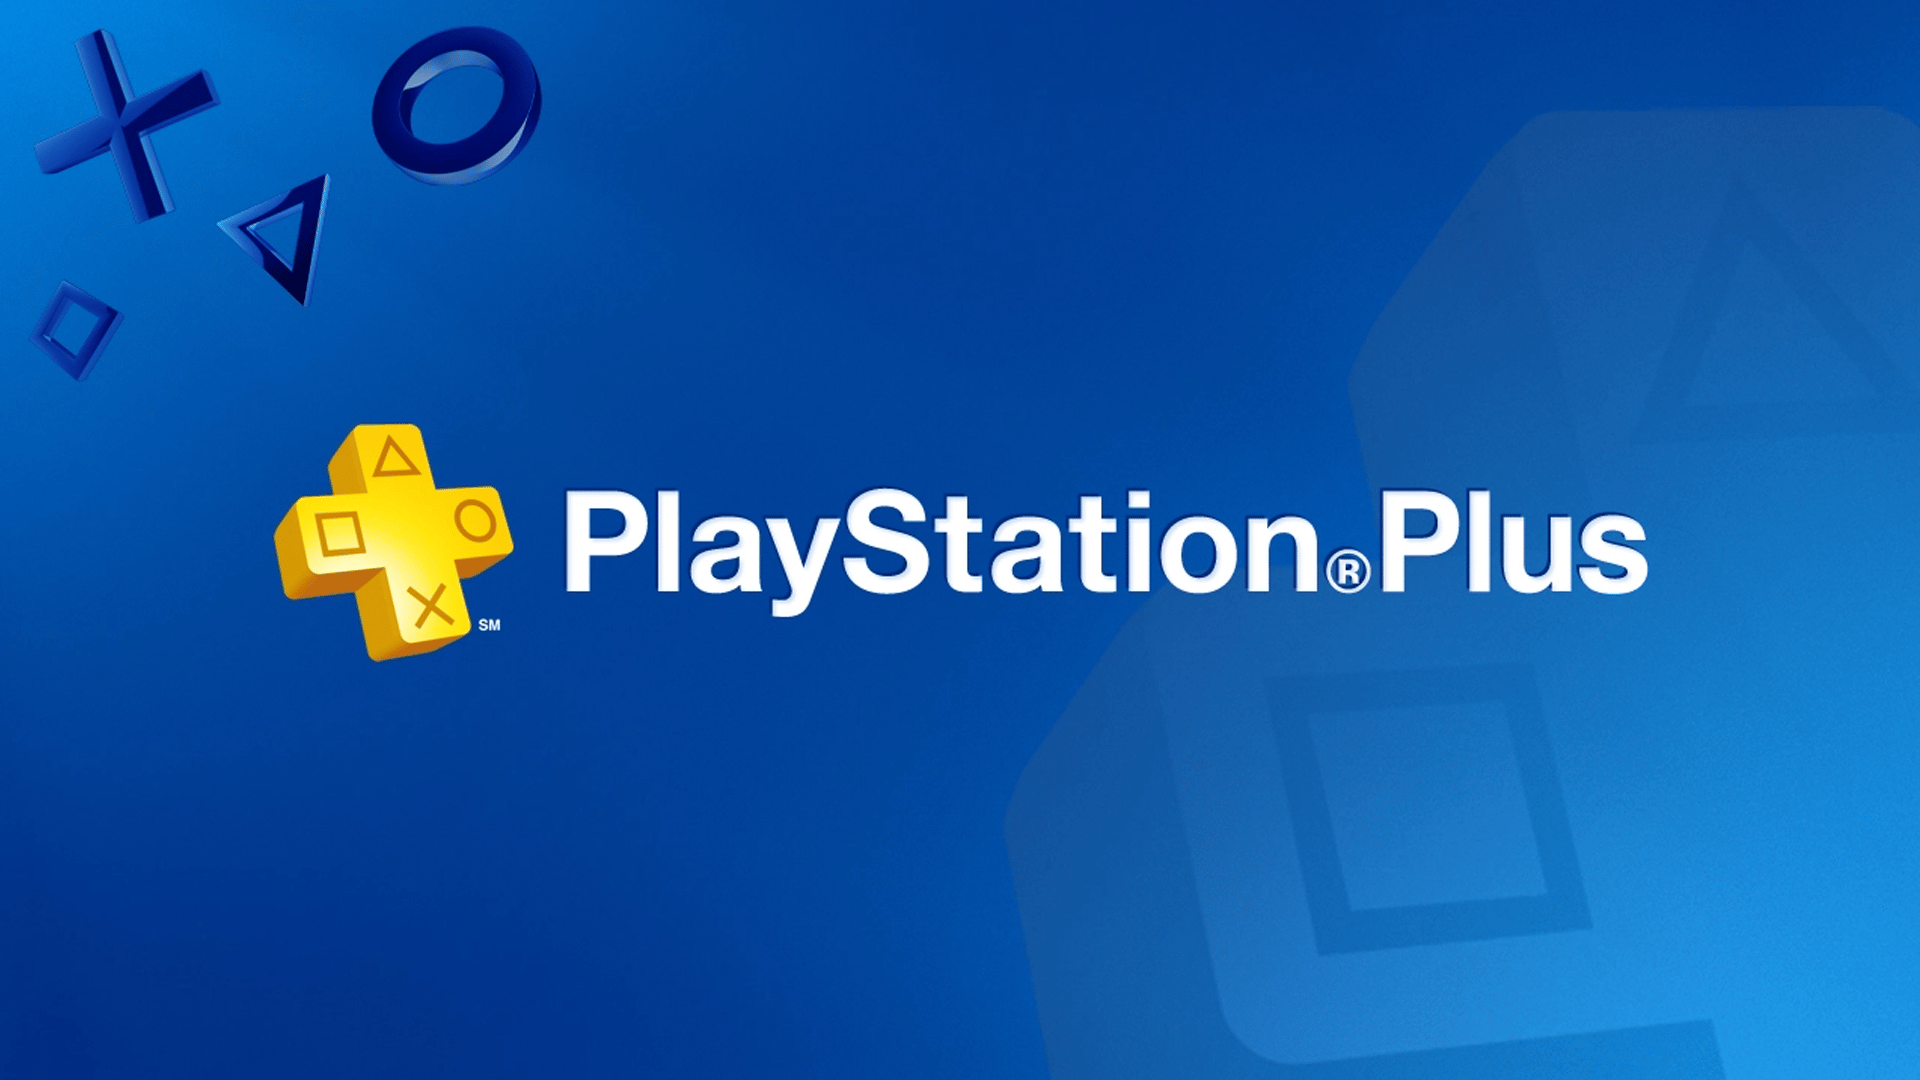 PlayStation on Twitter / X